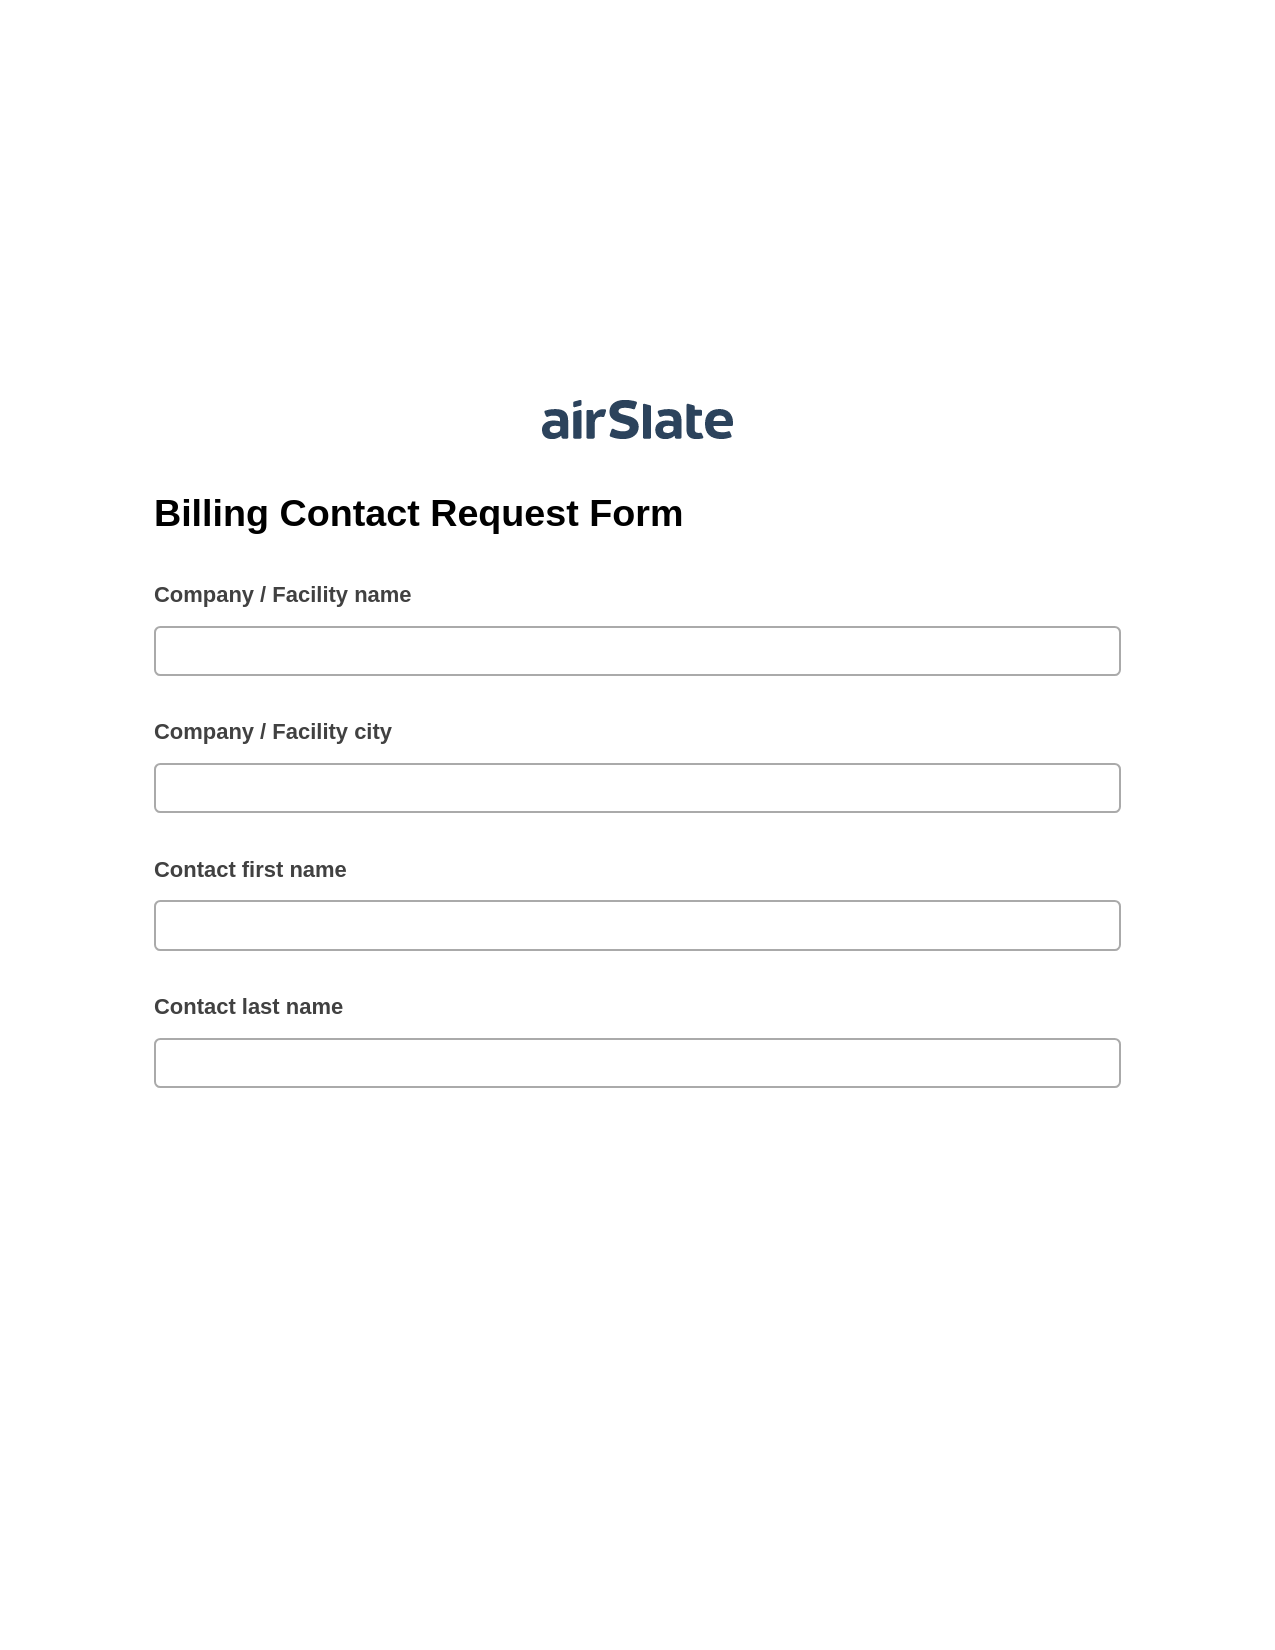 Multirole Billing Contact Request Form Pre-fill from NetSuite Records Bot, Send Mailchimp Campaign Bot, Google Drive Bot